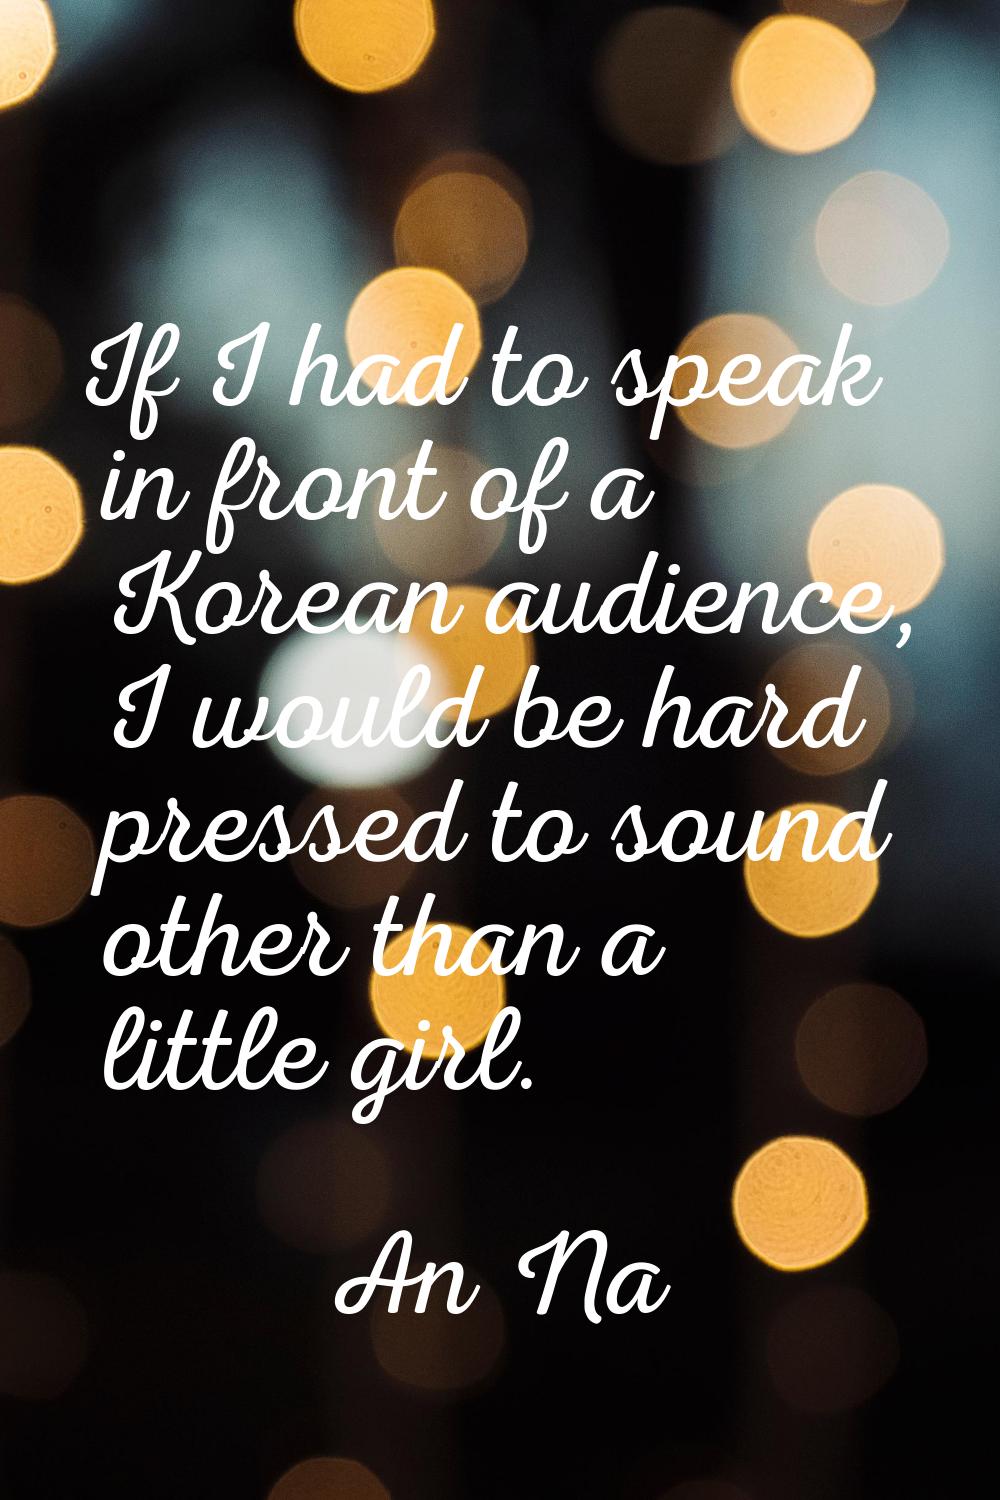 If I had to speak in front of a Korean audience, I would be hard pressed to sound other than a litt